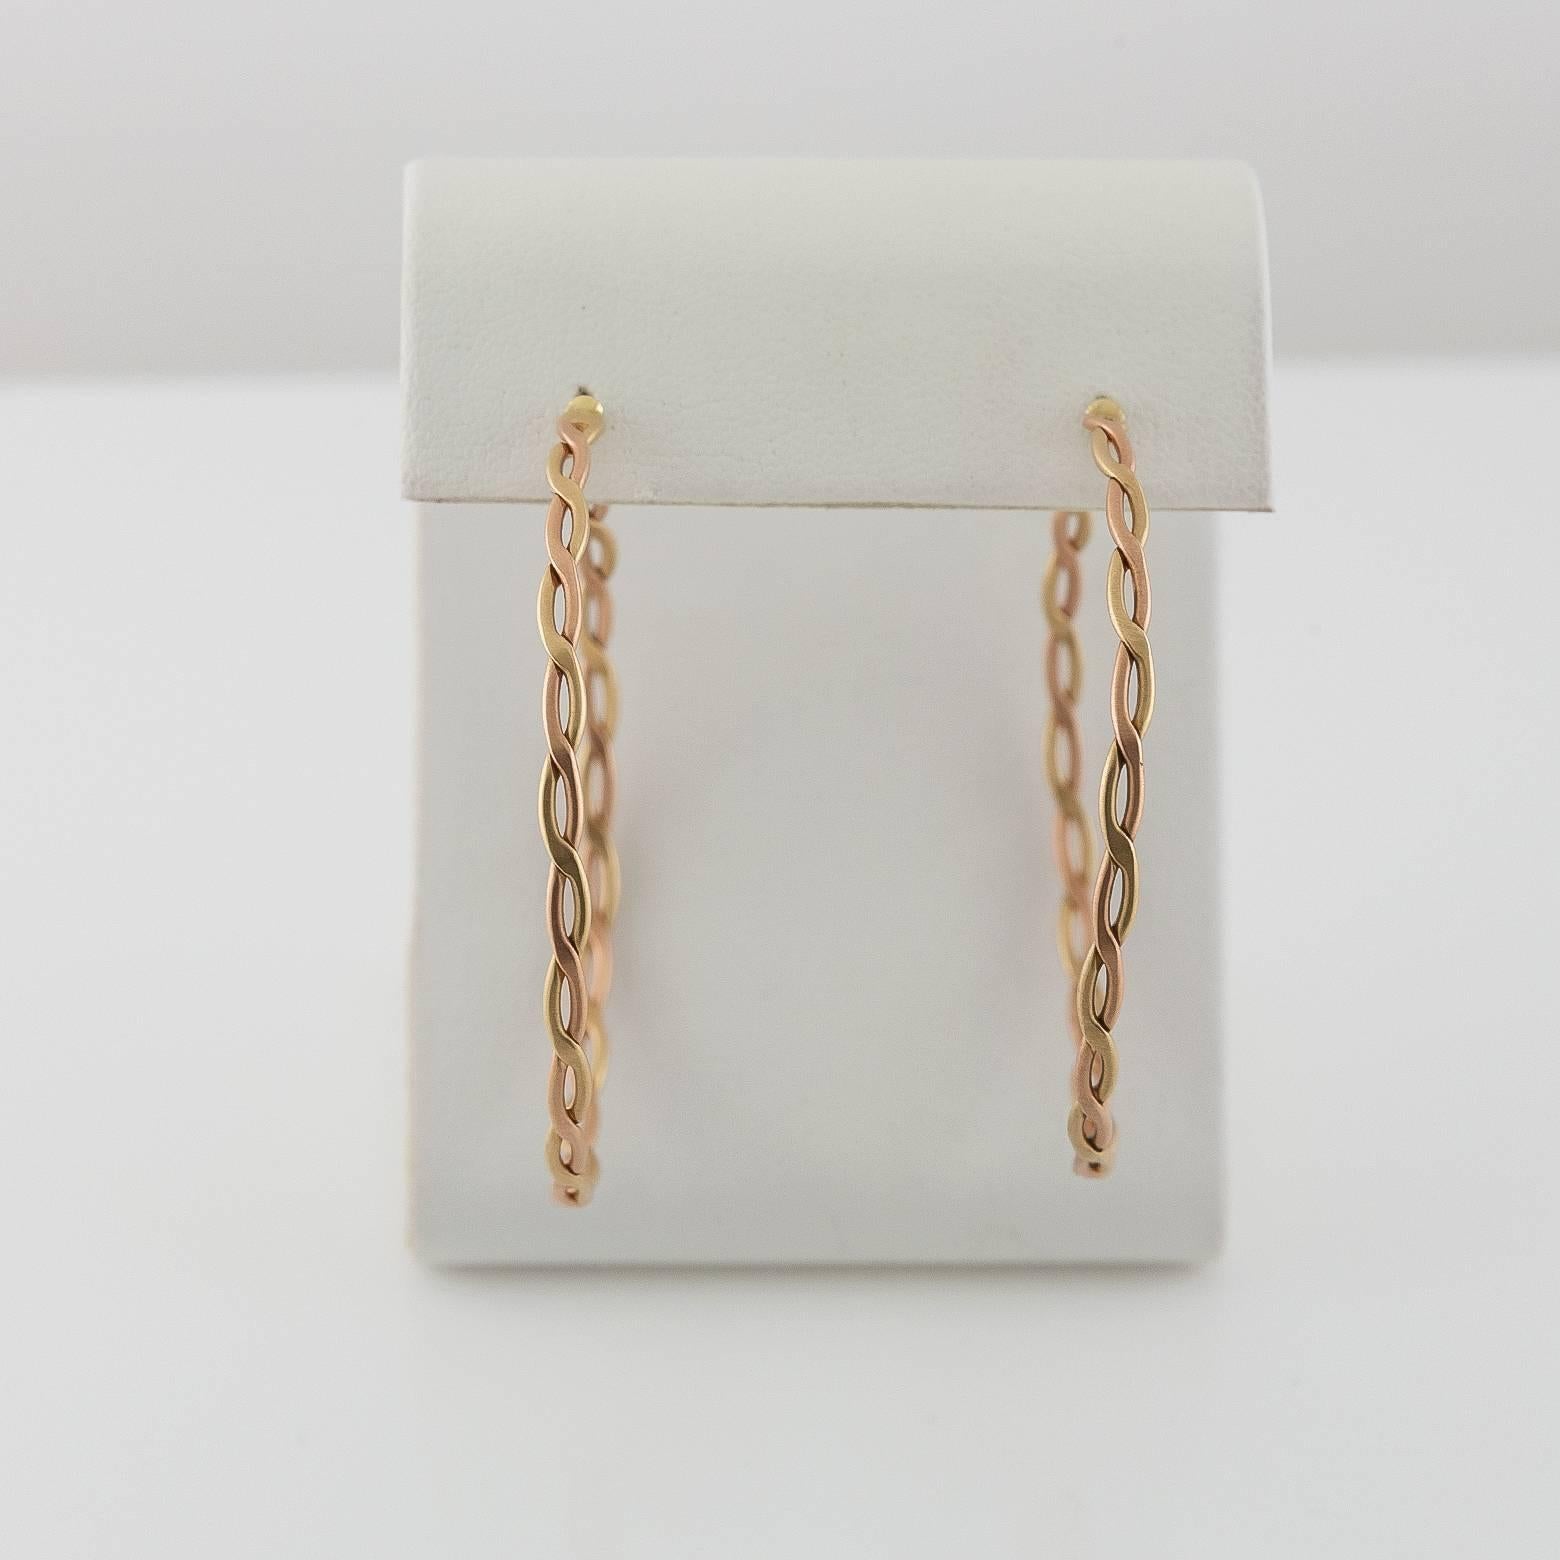 These beautiful woven medium-large sized hoop earrings blend together rose gold twisted with yellow gold accents The hoops are flexible and lightweight and have a matte finish. Very wearable, comfortable and add a little extra intricate detail to